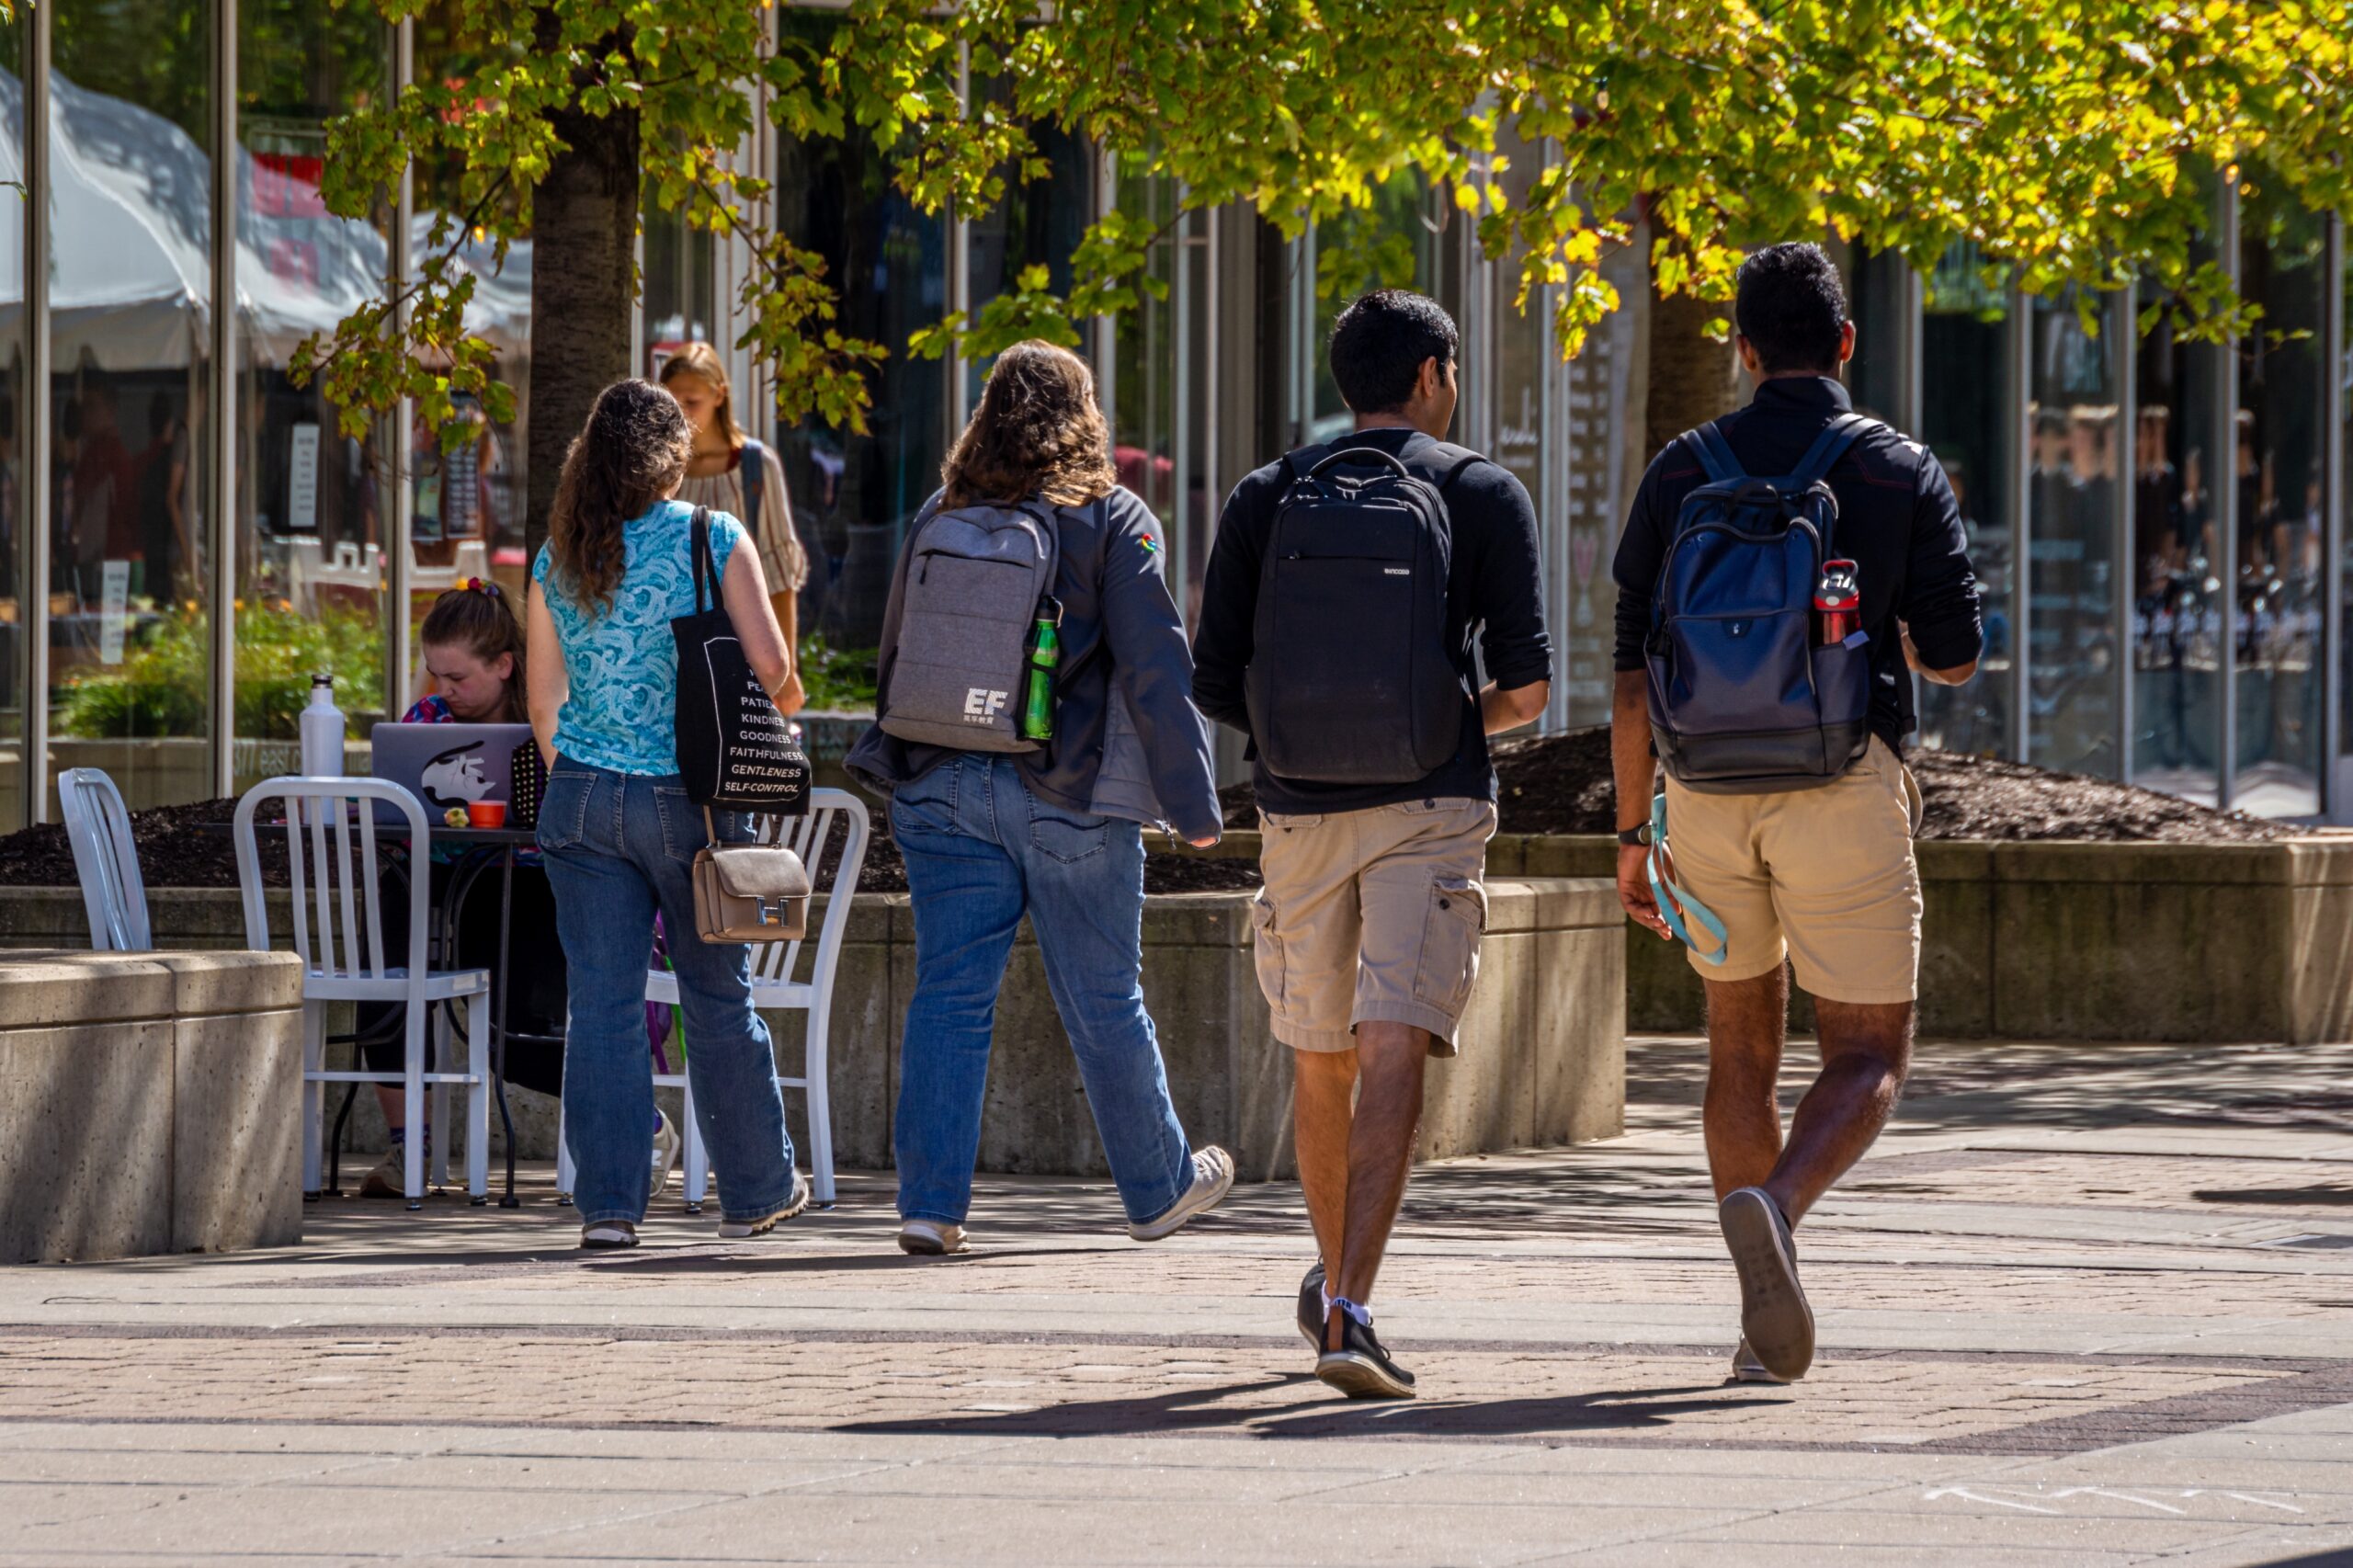 Students walking on East Campus Mall on the University of Wisconsin-Madison campus.